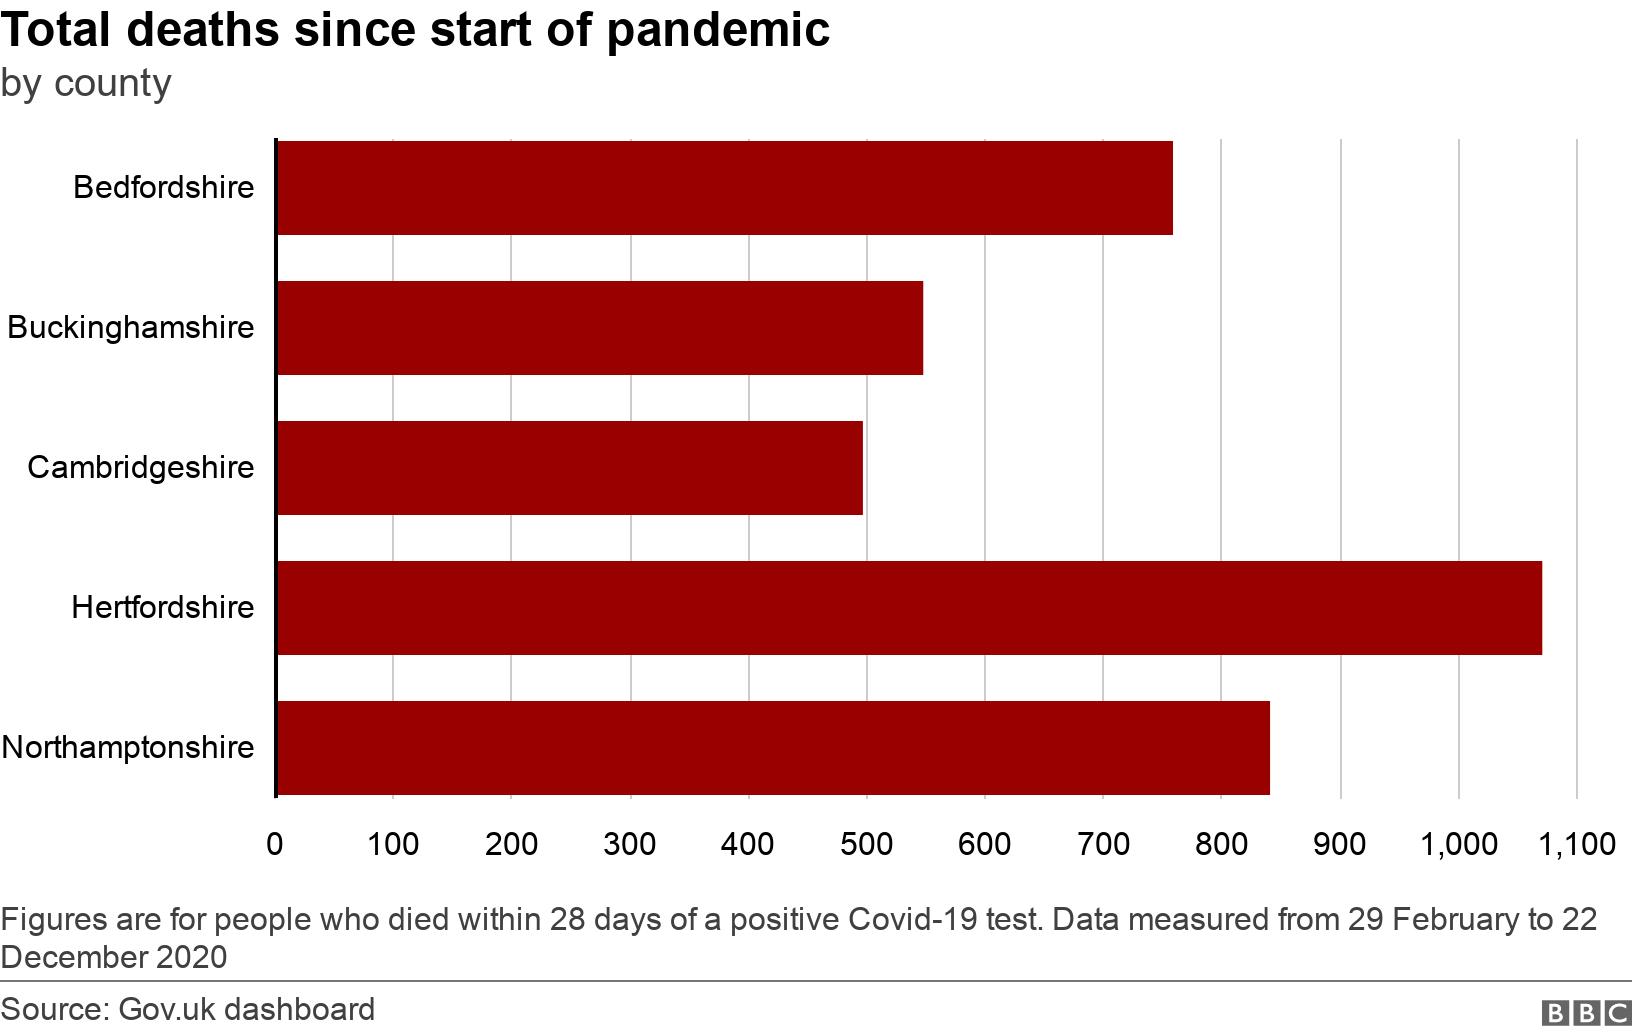 Total deaths since start of pandemic. by county. Figures are for people who died within 28 days of a positive Covid-19 test. Data measured from 29 February to 22 December 2020.